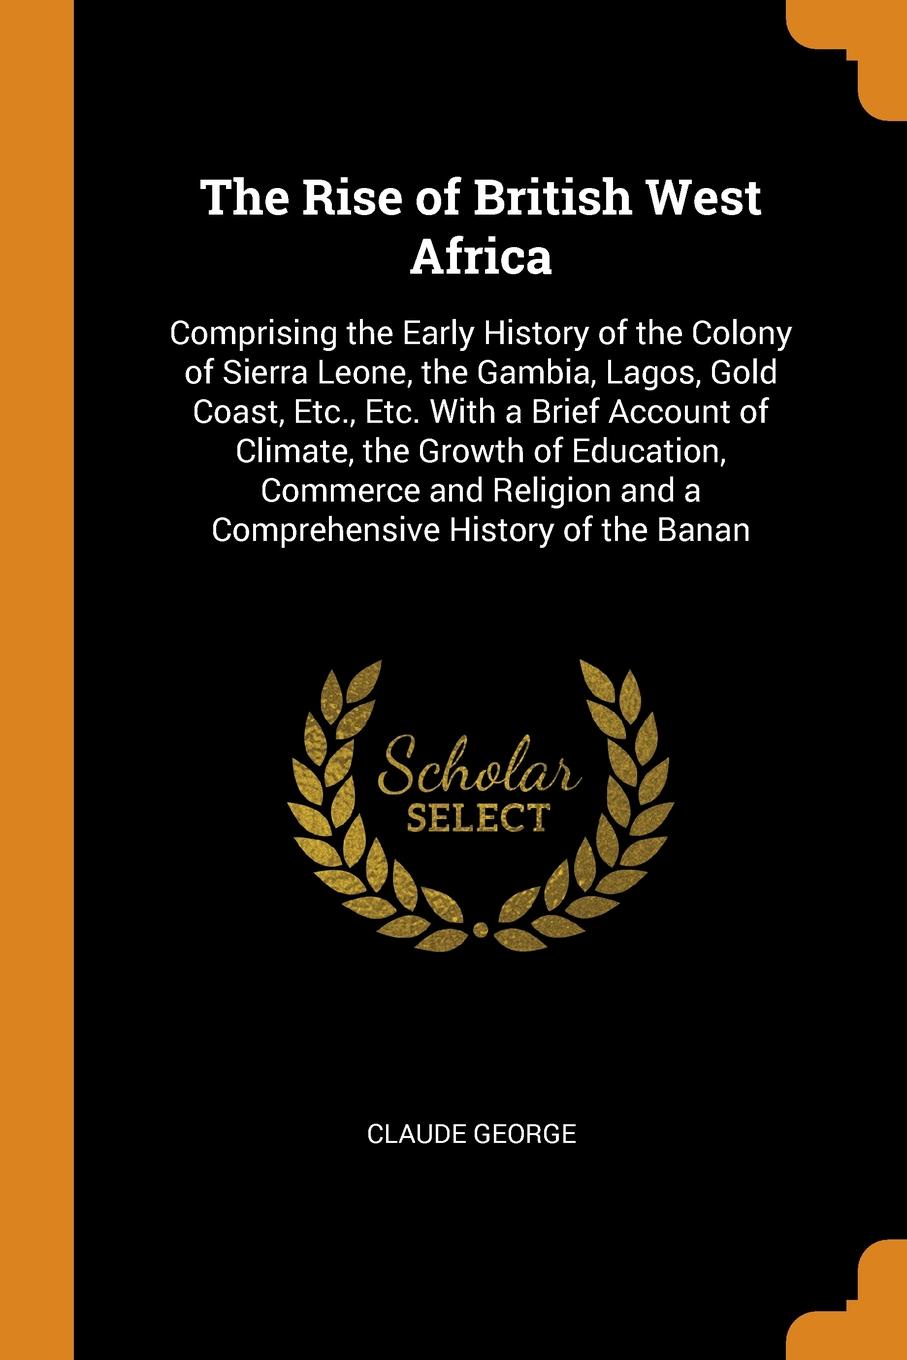 The Rise of British West Africa. Comprising the Early History of the Colony of Sierra Leone, the Gambia, Lagos, Gold Coast, Etc., Etc. With a Brief Account of Climate, the Growth of Education, Commerce and Religion and a Comprehensive History of t...